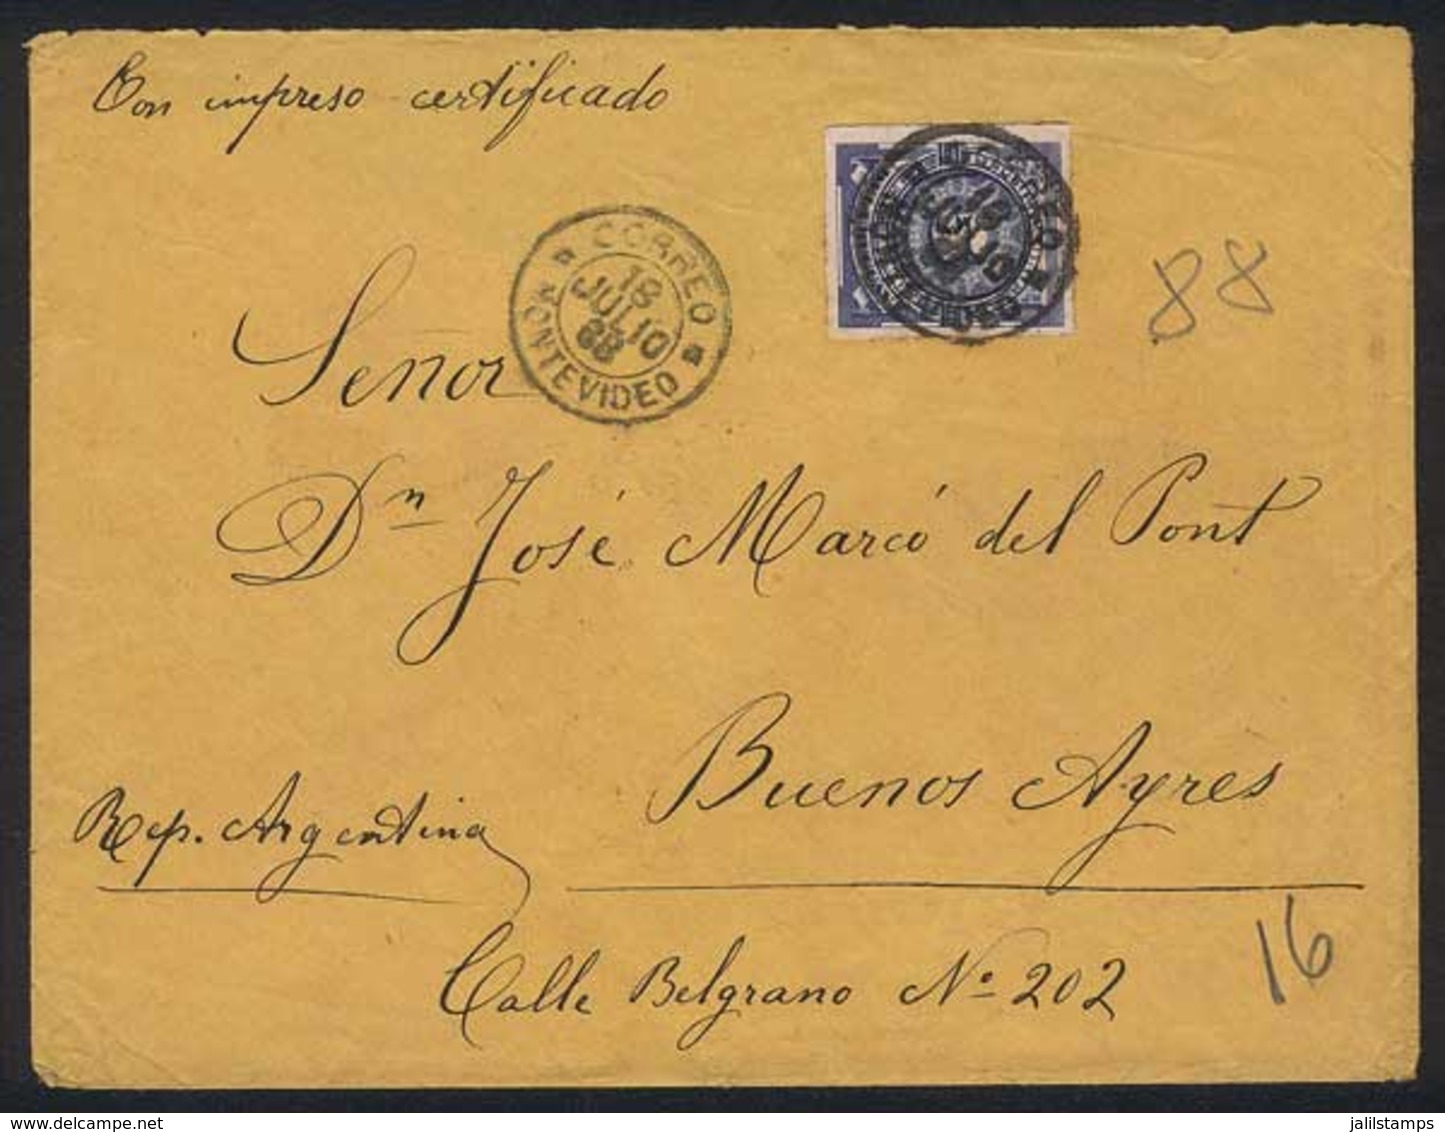 URUGUAY: Cover Franked By Sc.61, Sent From Montevideo To Buenos Aires On 18/JUL/1888, VF Quality! - Uruguay